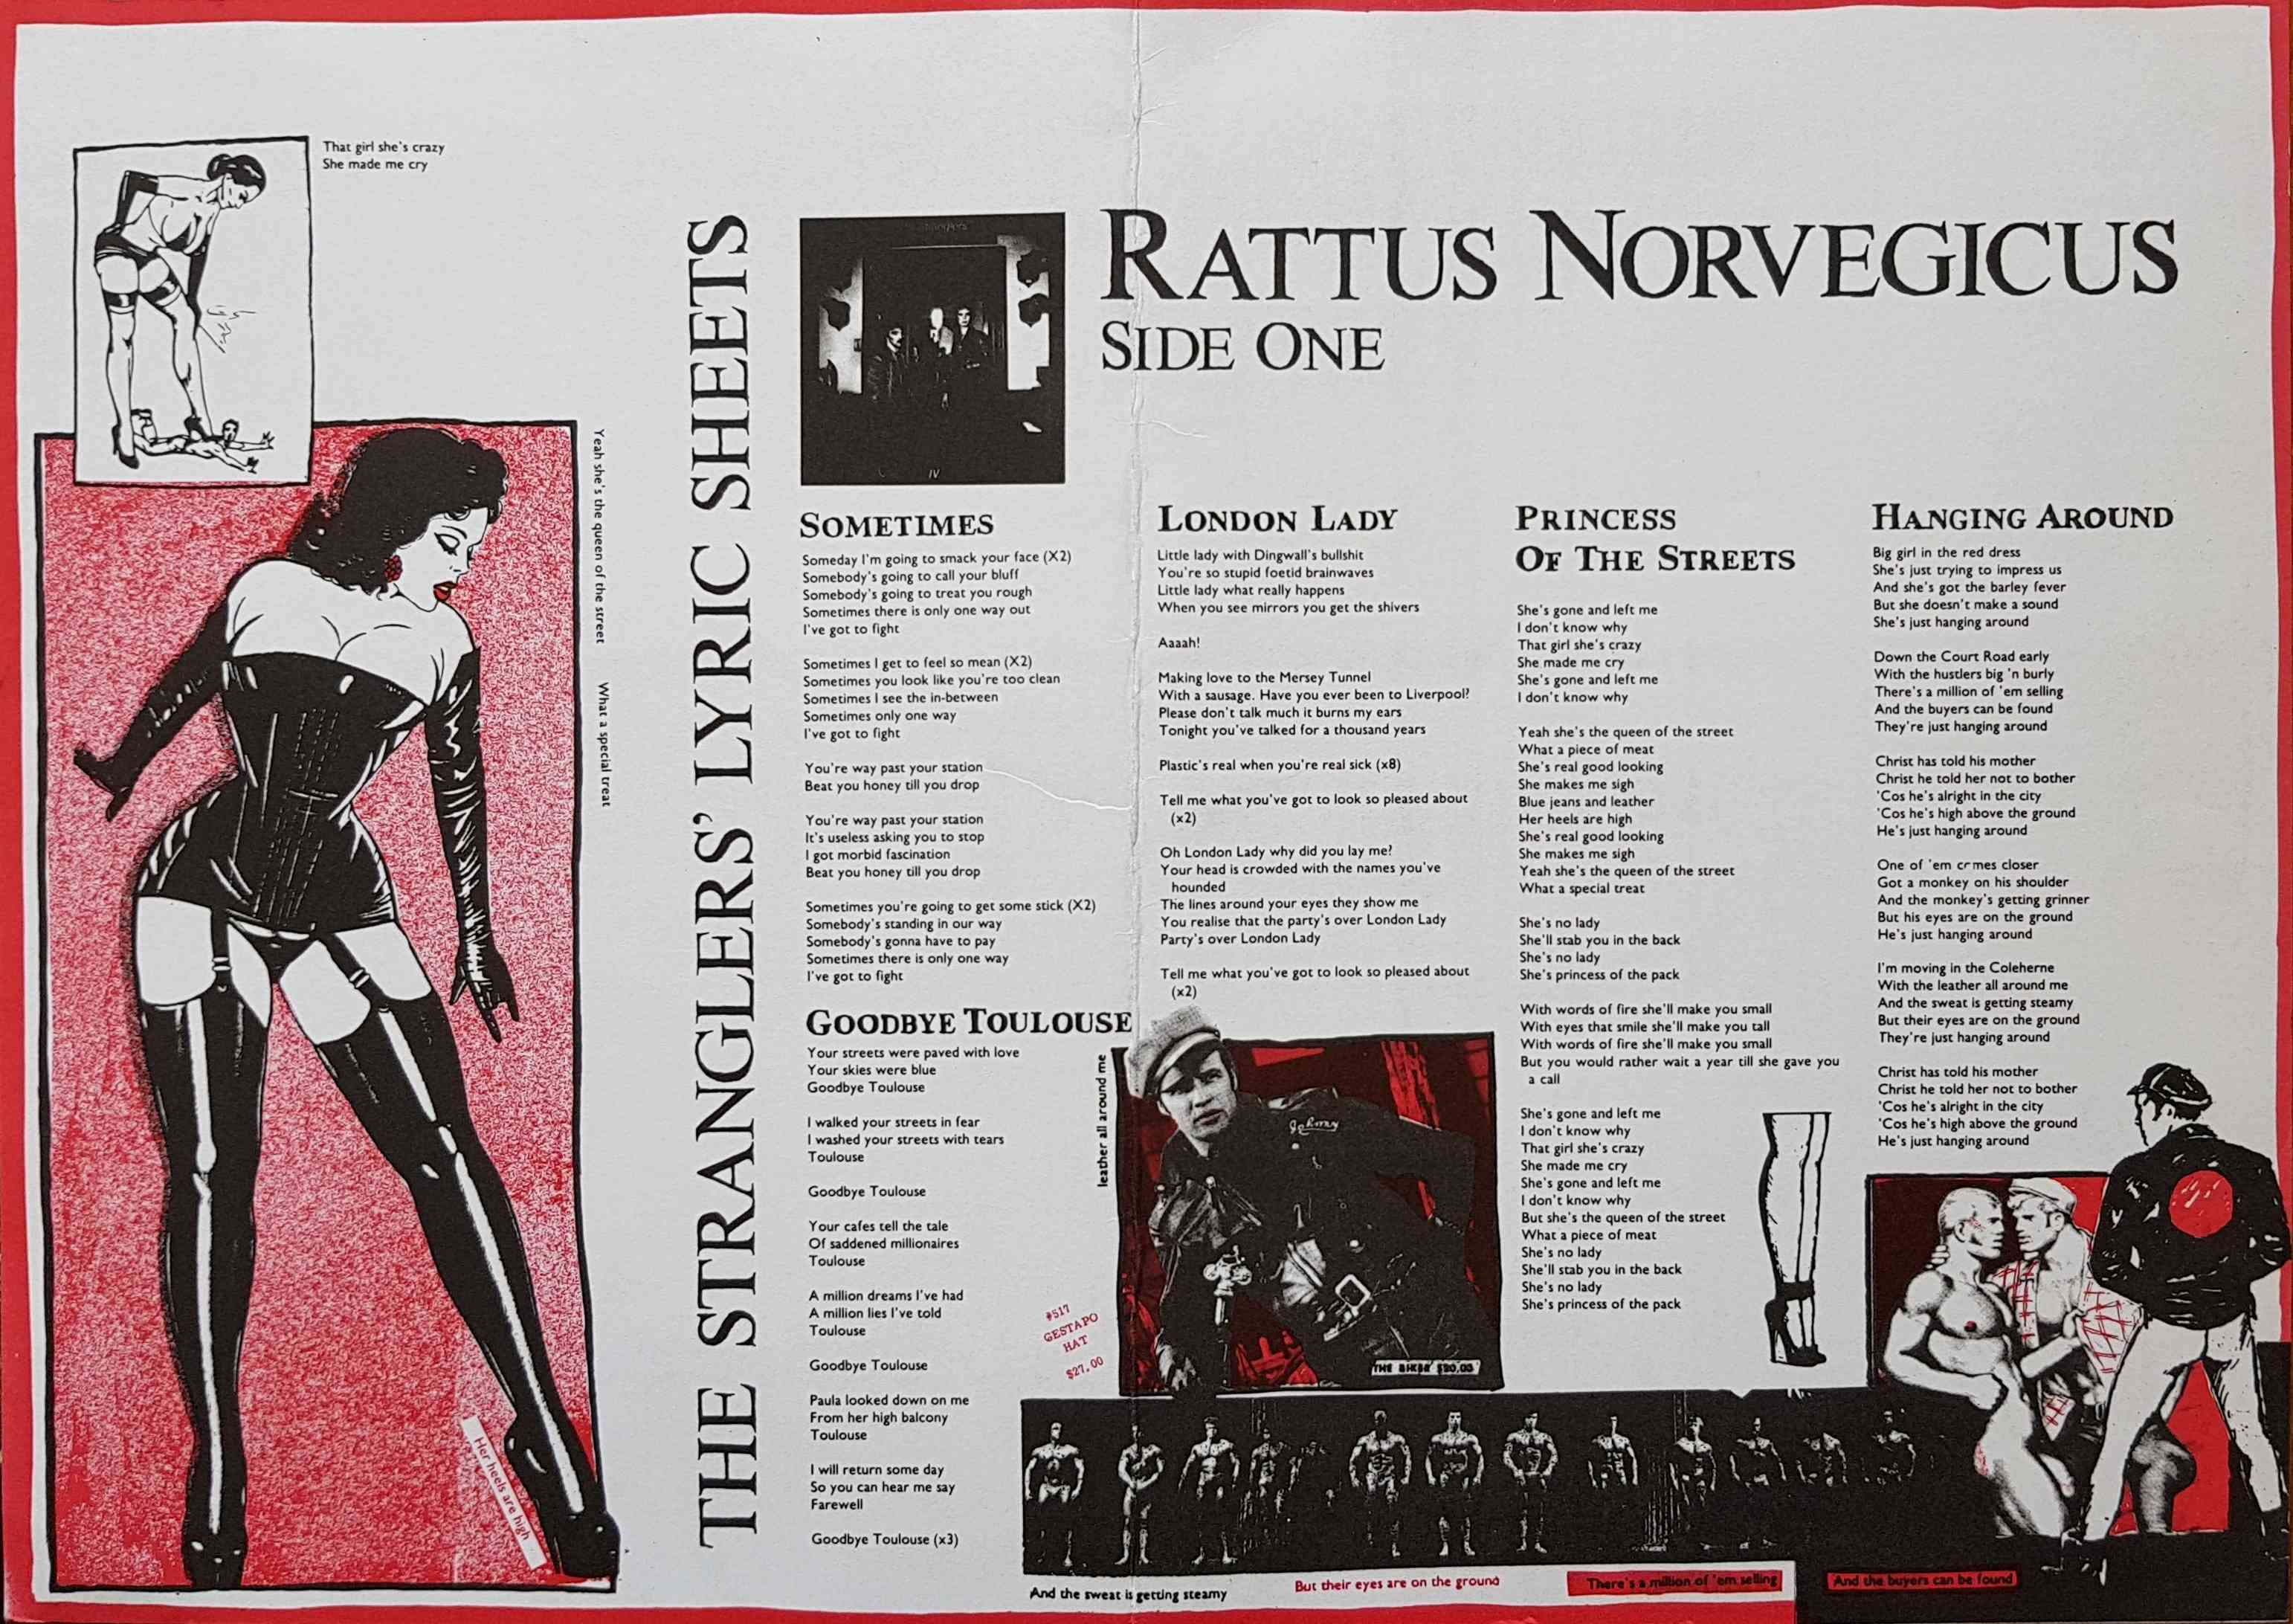 Picture of RATLYCSH Rattus Norvegicus lyric sheets by artist The Stranglers from The Stranglers books